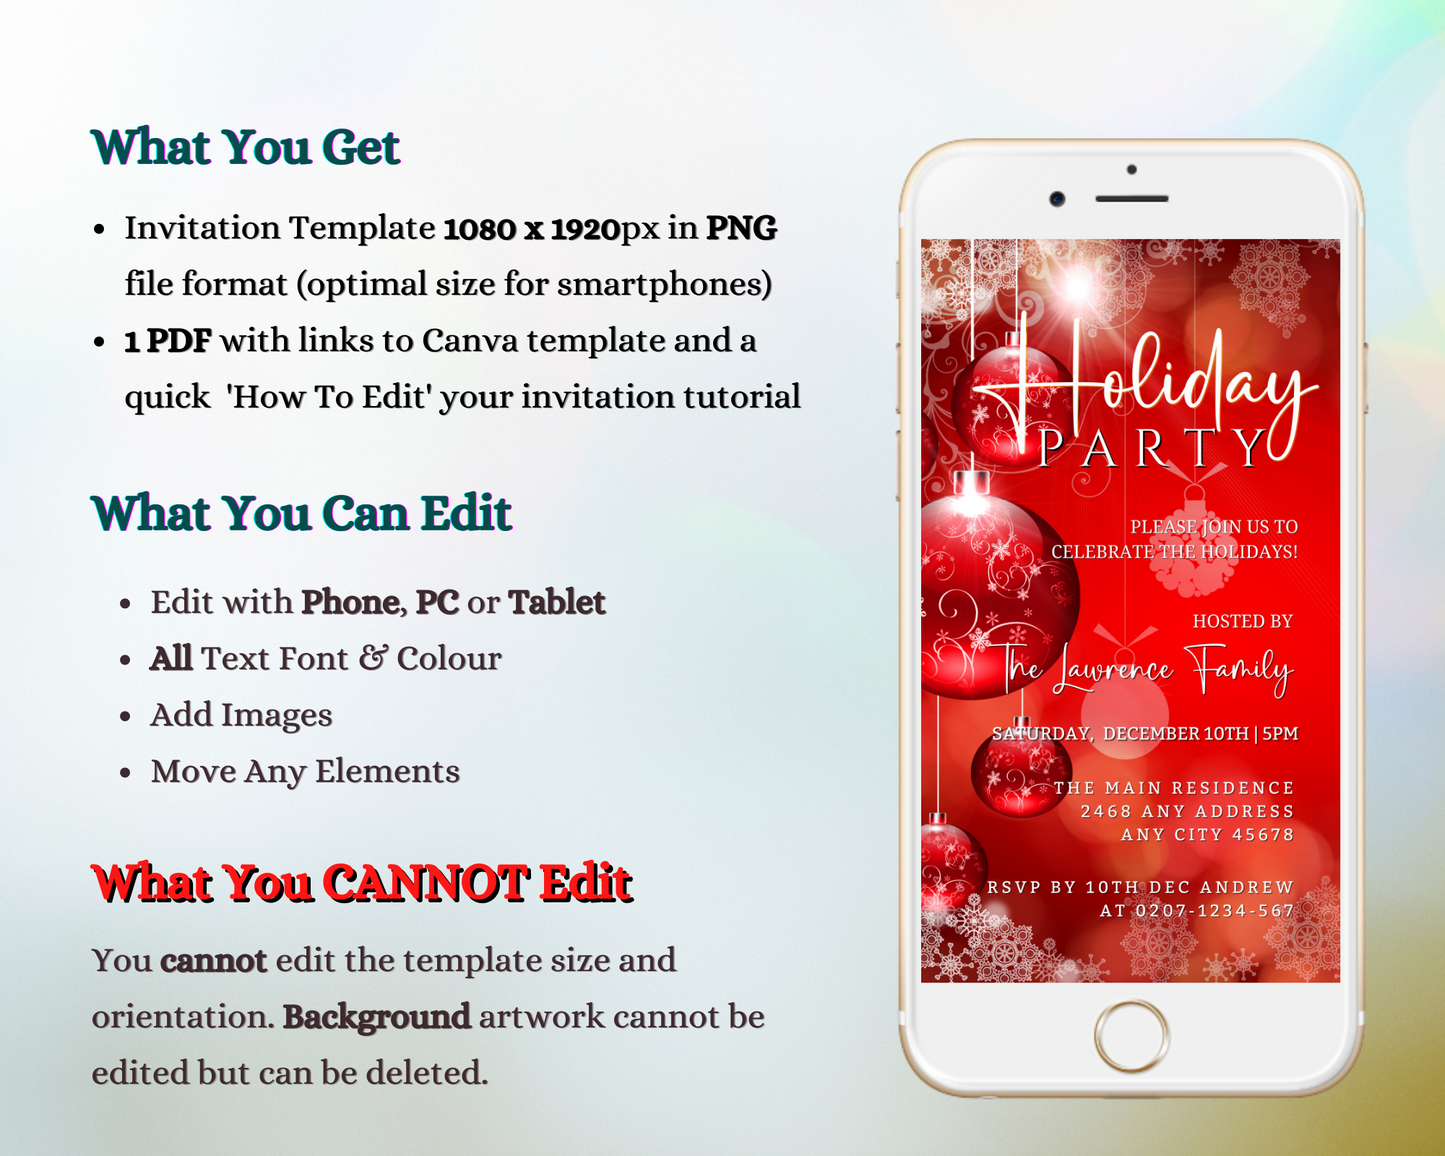 Glowing Red White Ornaments | Holiday Party Invitation displayed on a smartphone, featuring festive red and white decorative elements.